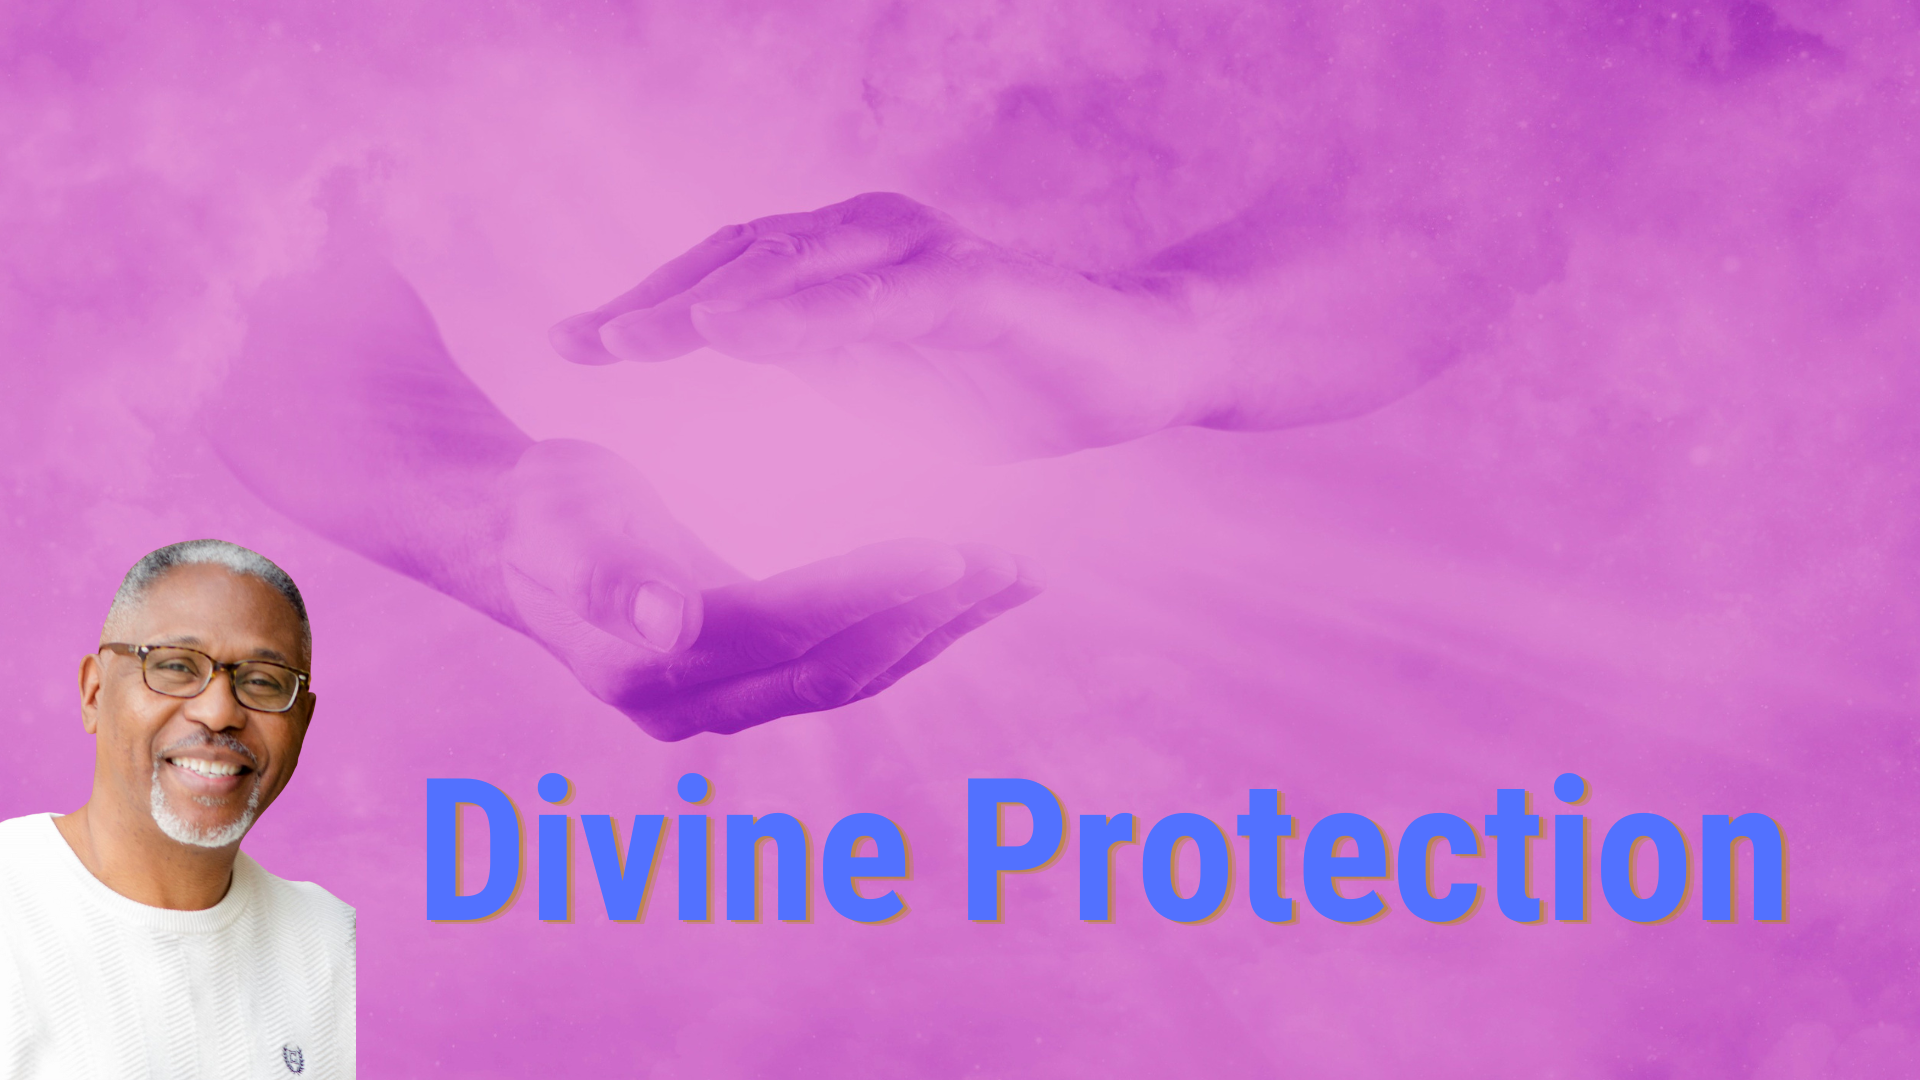 Divine Protection blog featured image